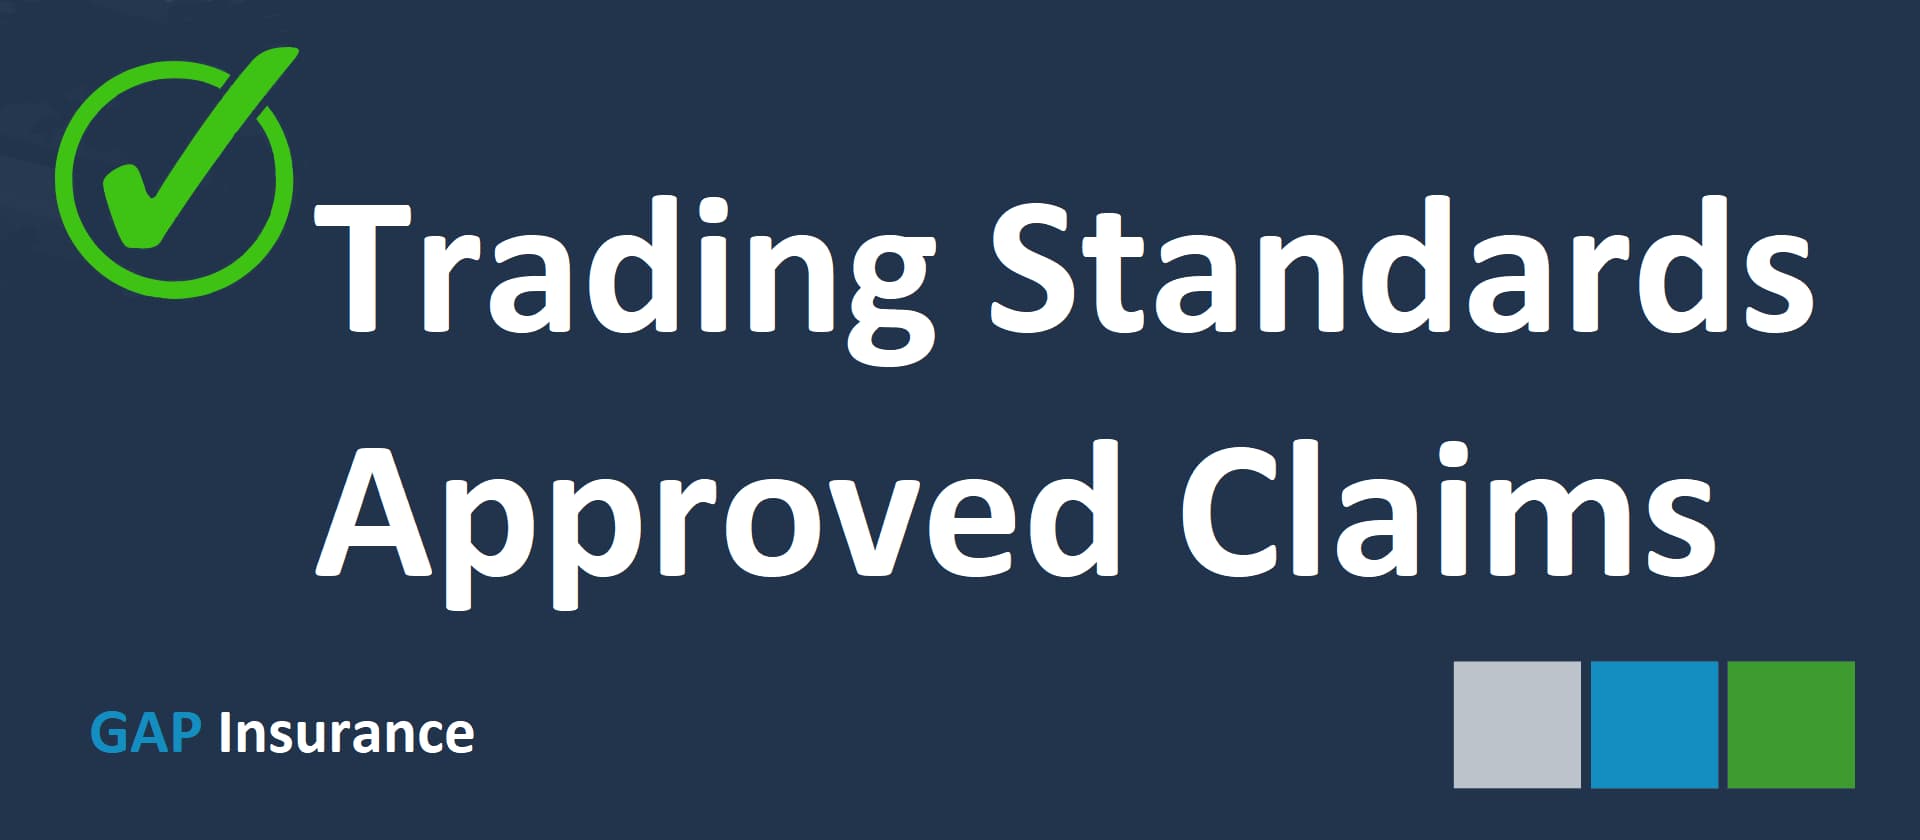 Trading Standards Approved Claims